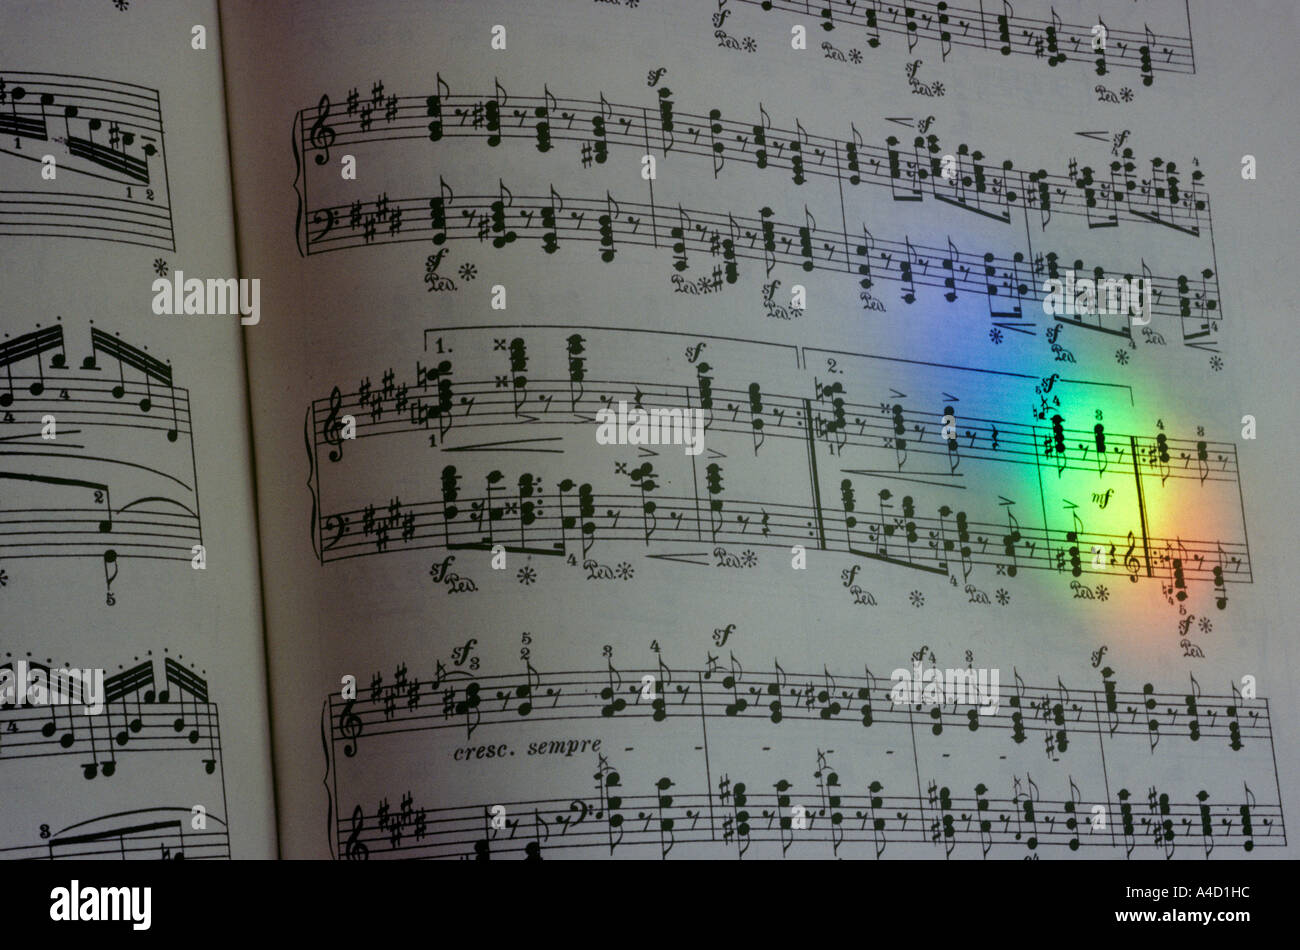 A rainbow of colours, cast by a prism, illuminates a page of piano music by Chopin. Stock Photo